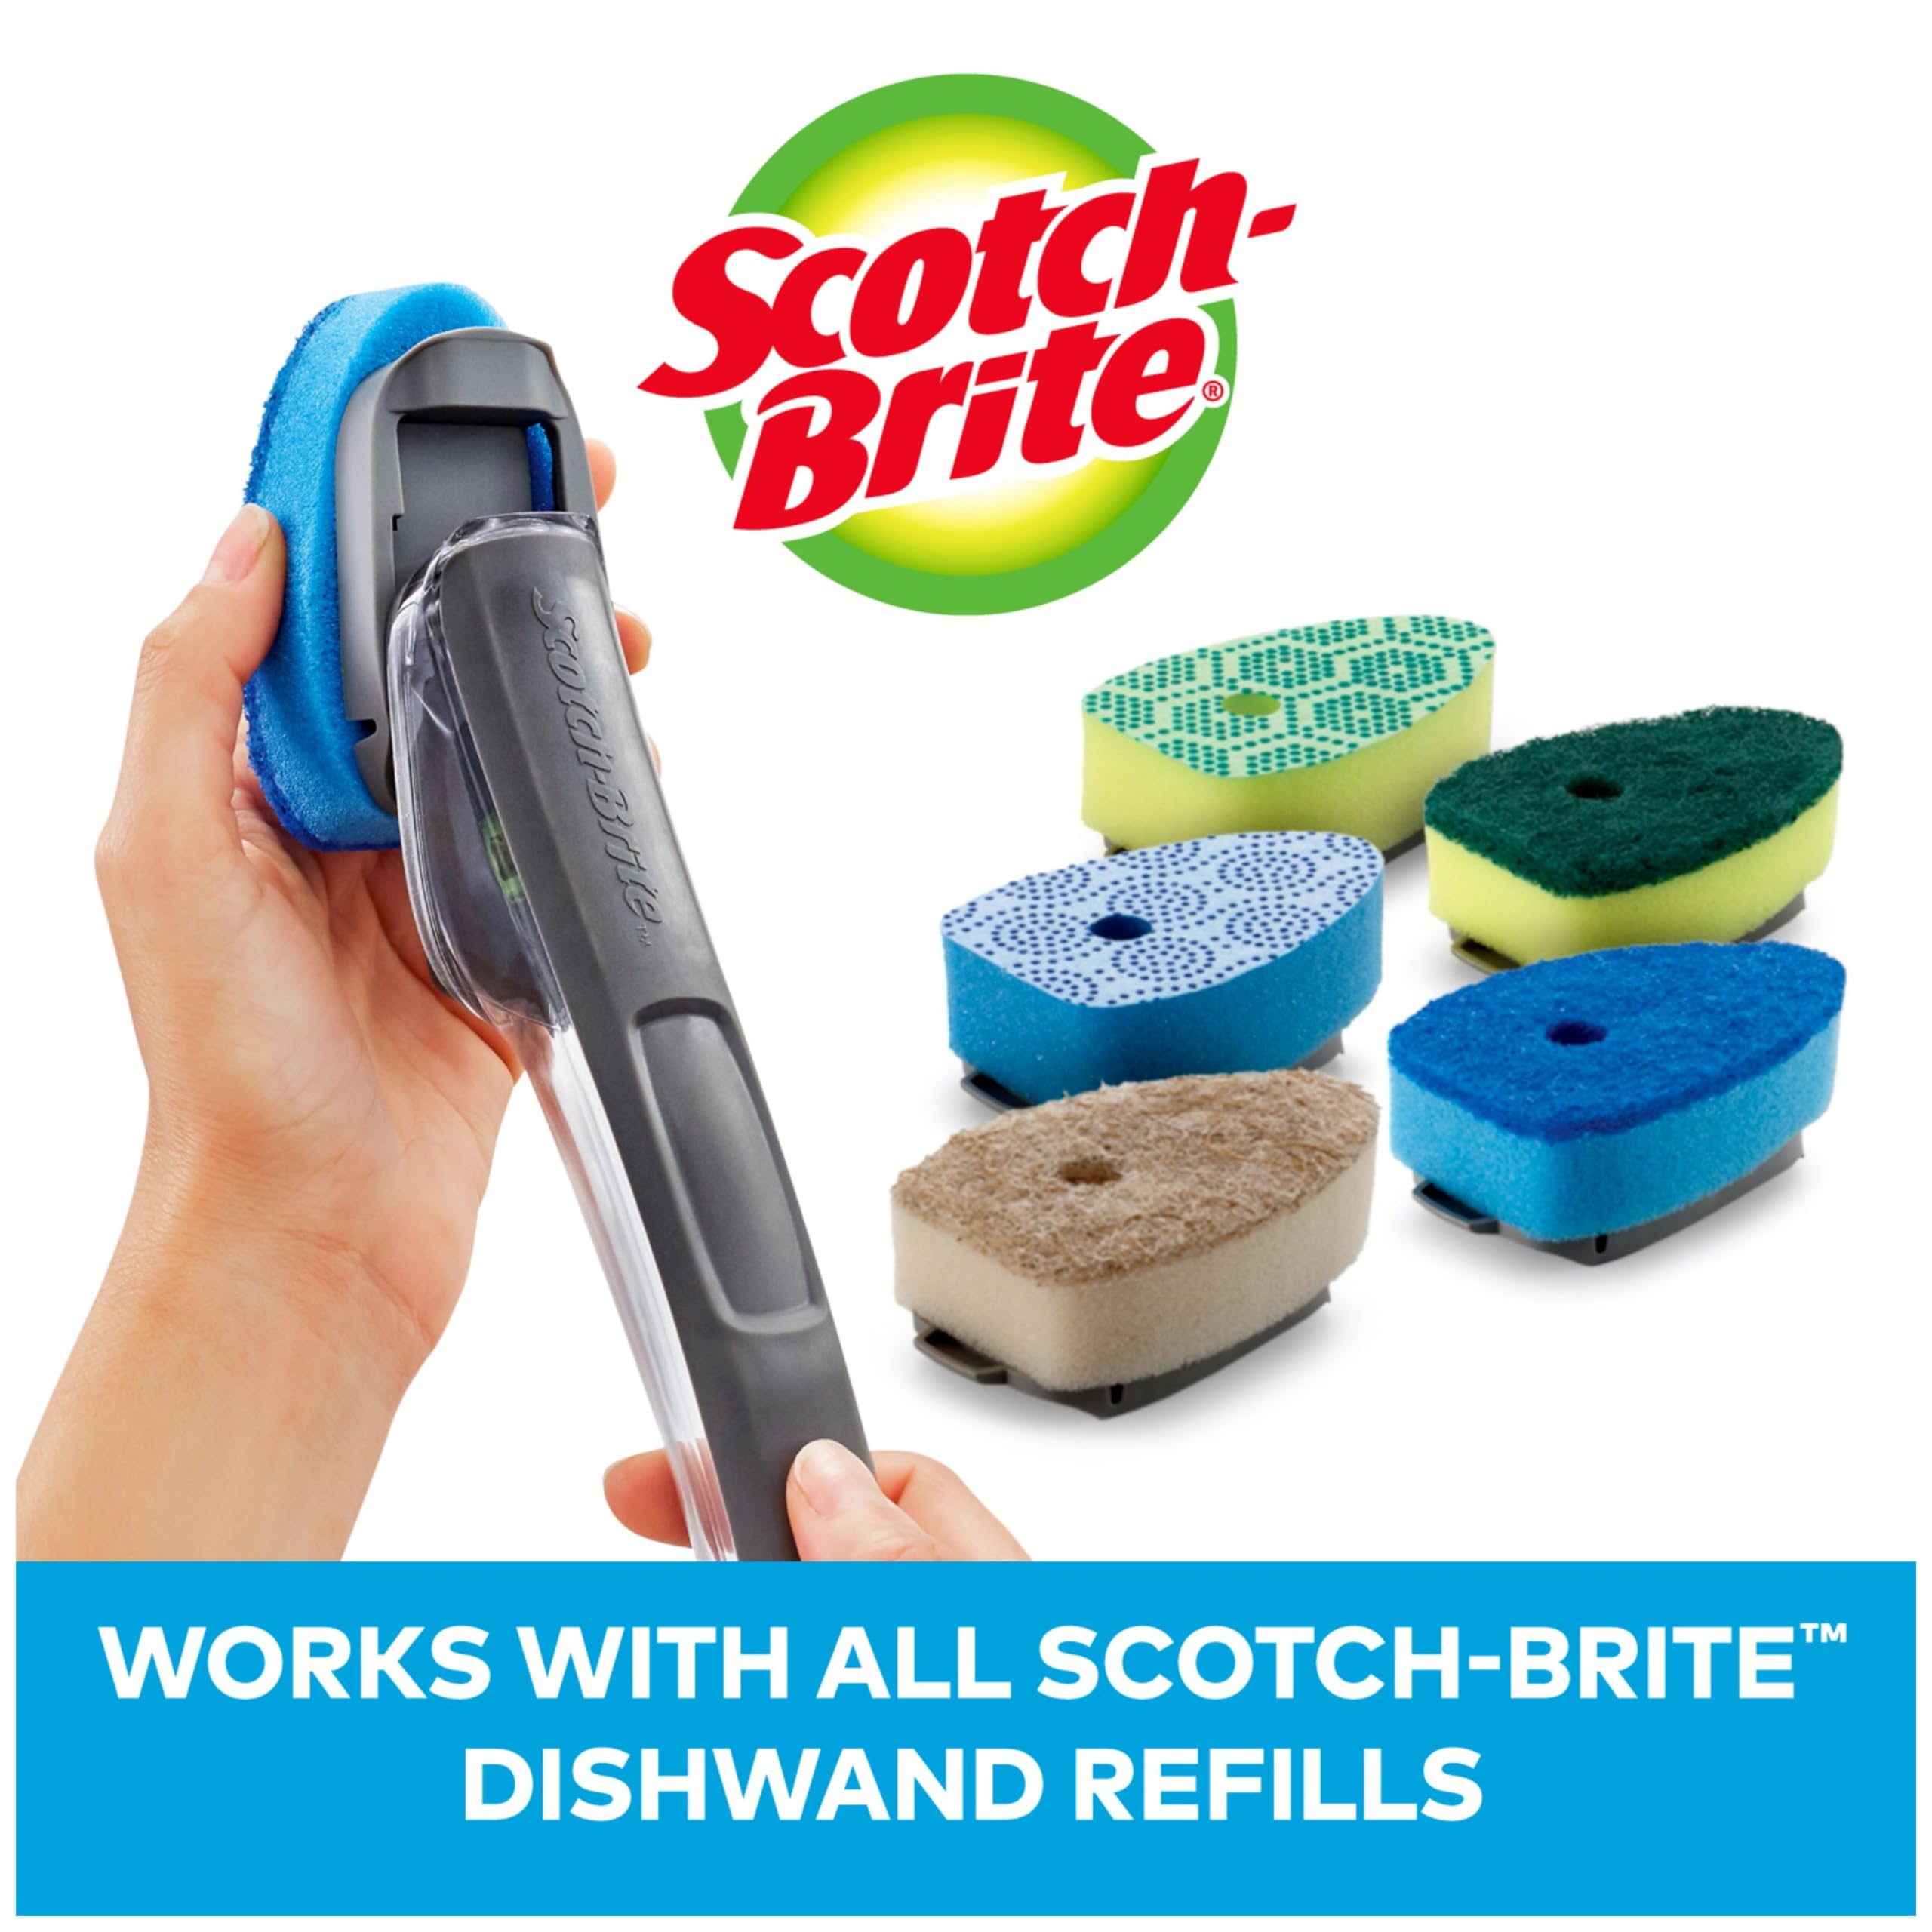 Scotch-Brite Non-Scratch Advanced Soap Control Dishwand Kit, Includes 1 Wand & 5 Refill Pads, Control Soap With A Button, Keep Your Hands Out Of Dirty Water